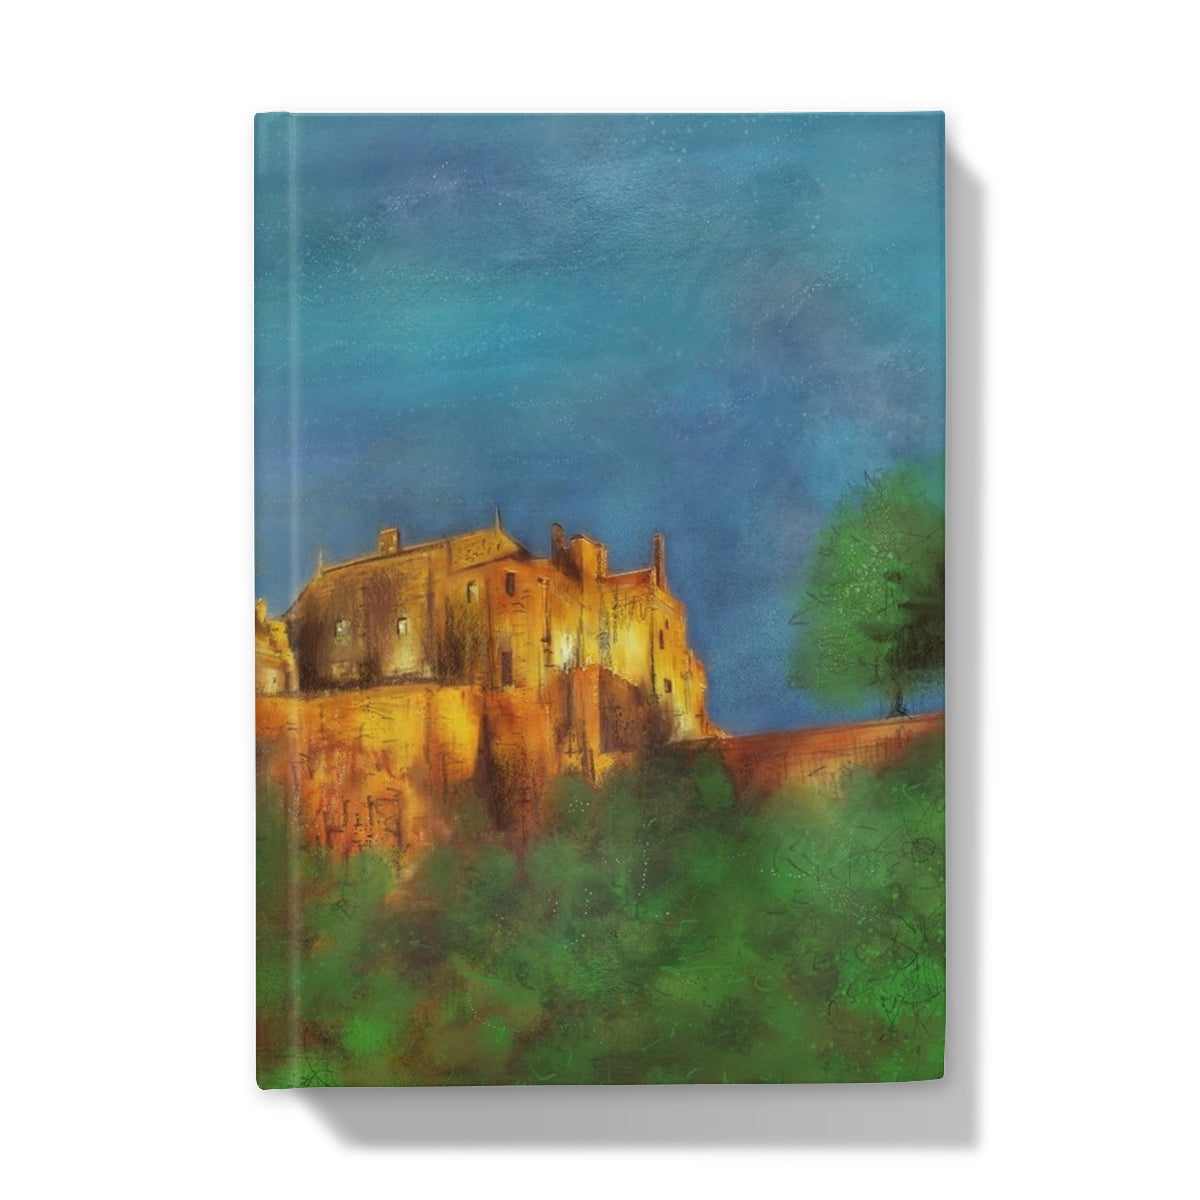 Stirling Castle Art Gifts Hardback Journal-Journals & Notebooks-Historic & Iconic Scotland Art Gallery-A5-Lined-Paintings, Prints, Homeware, Art Gifts From Scotland By Scottish Artist Kevin Hunter